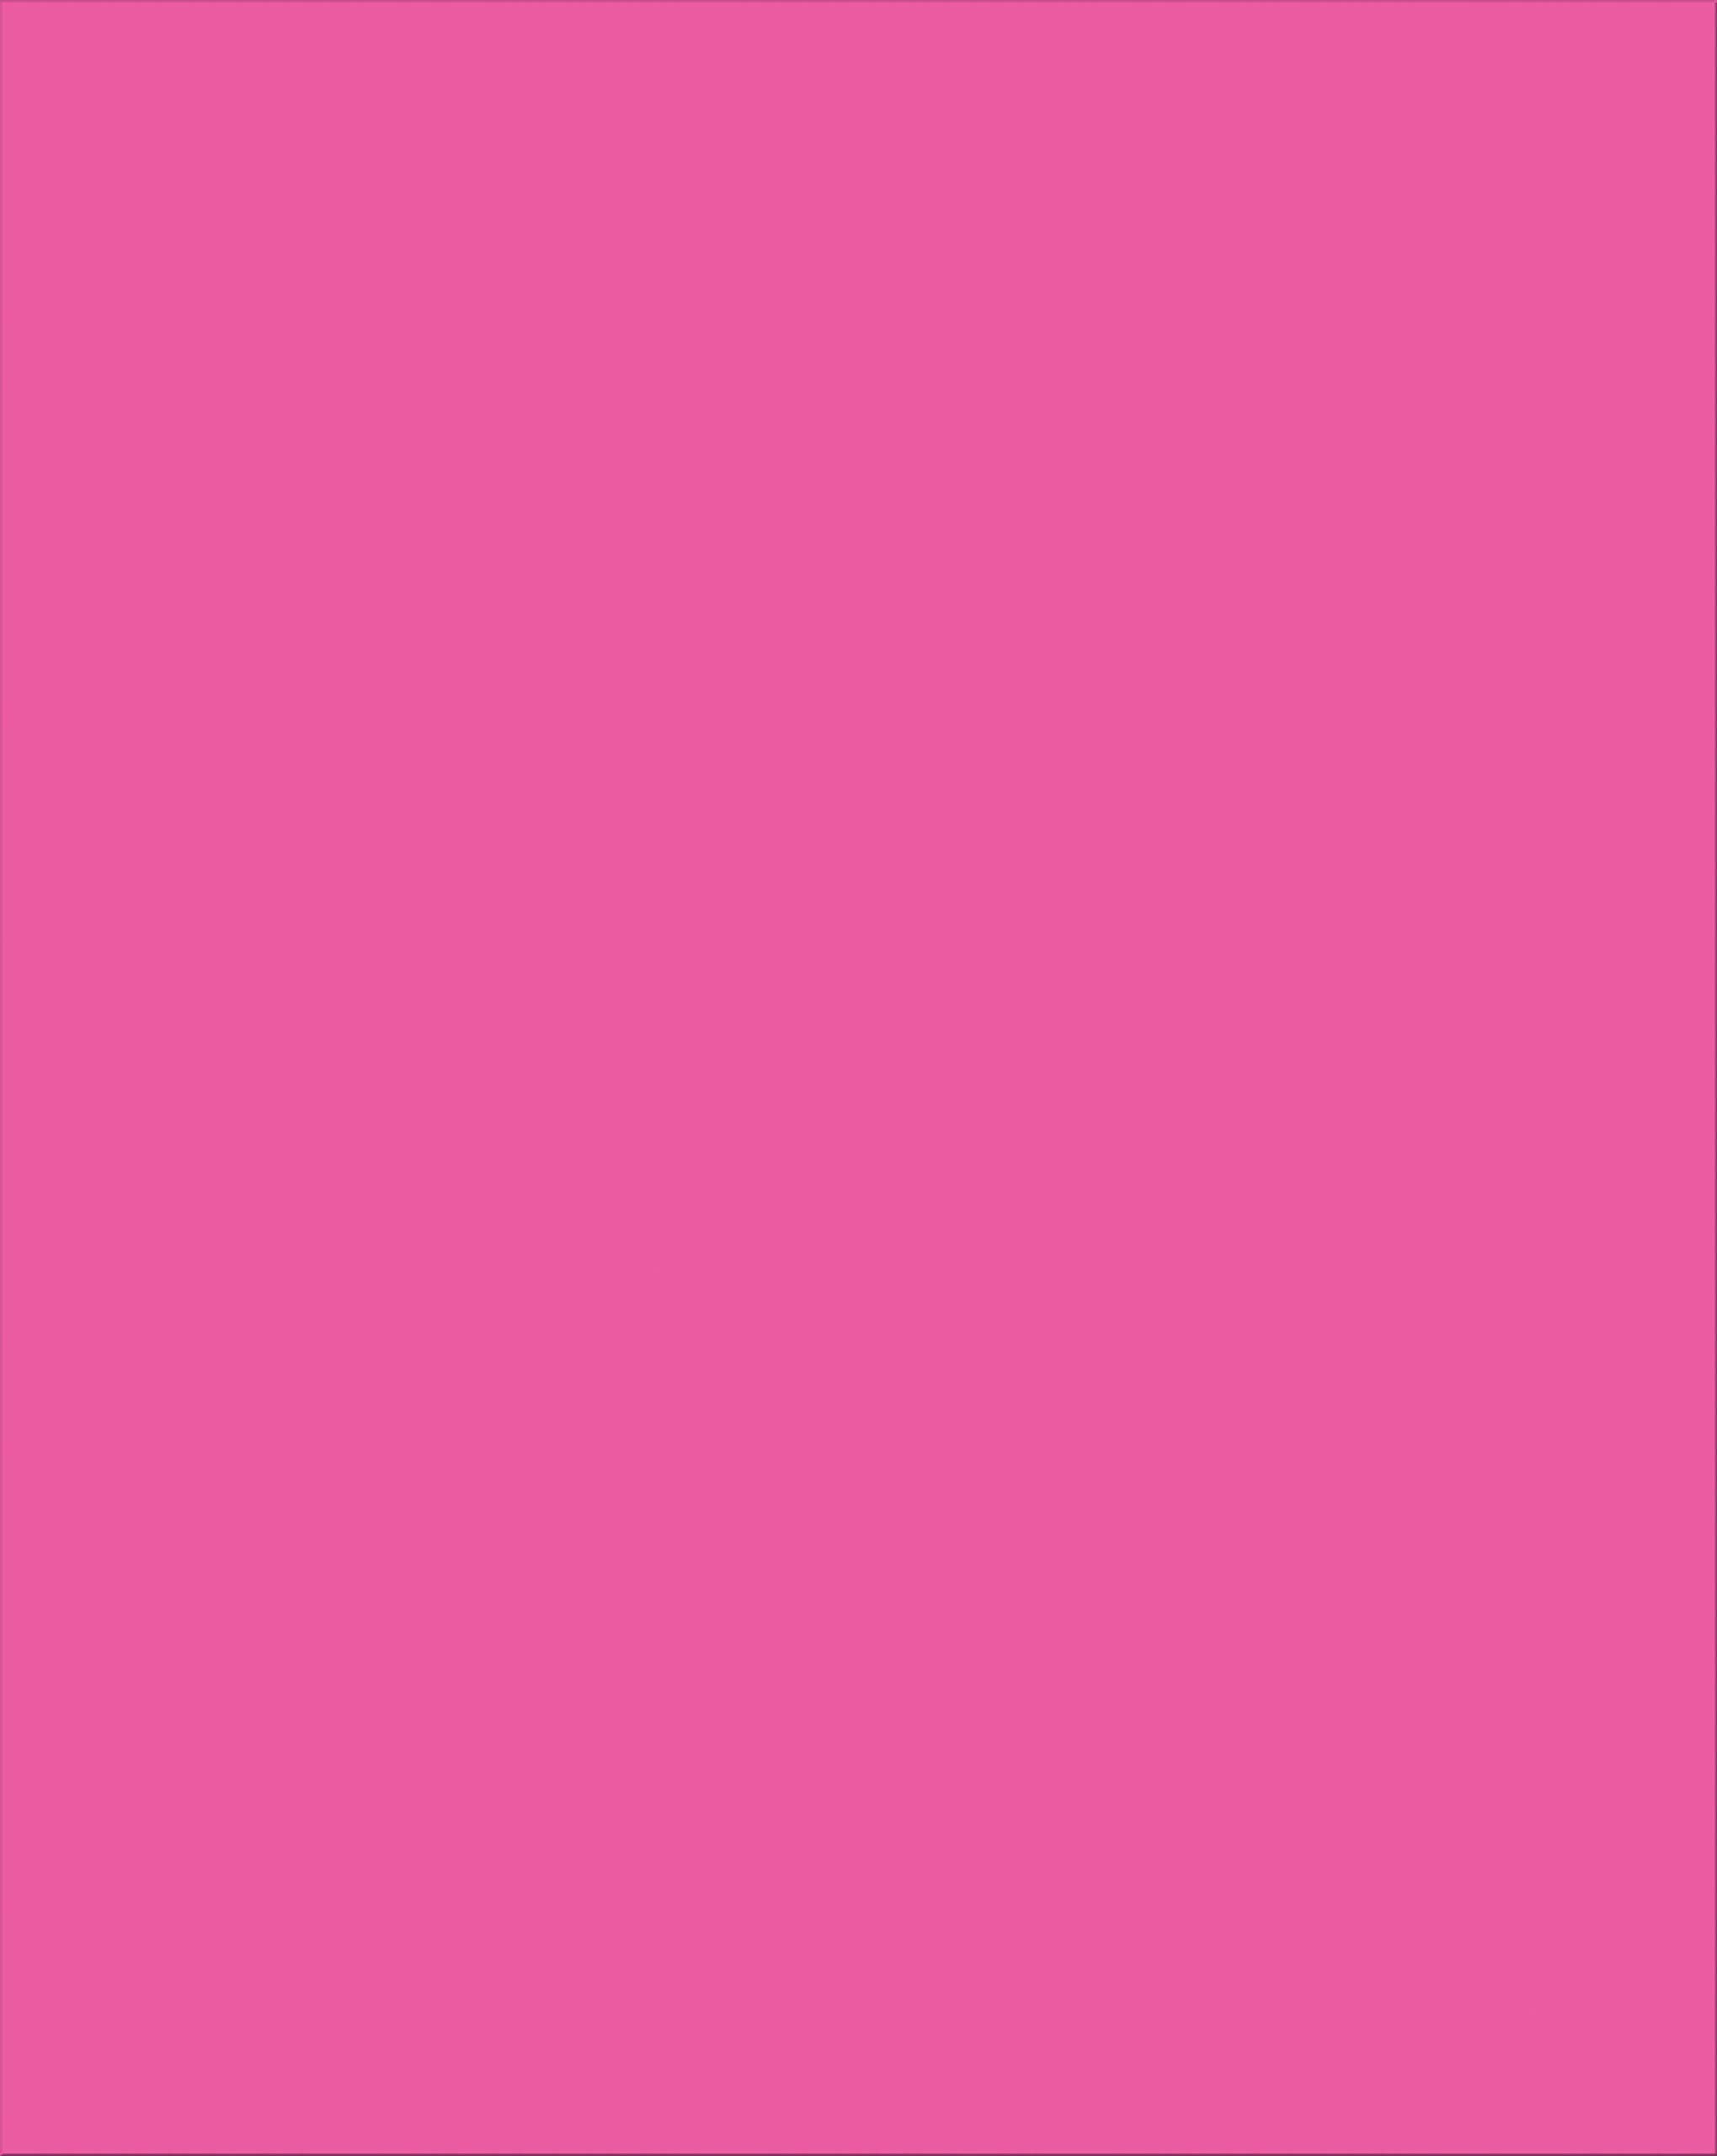 Pacon Ucreate Plastic Poster Board, Neon Pink, 22 x 28, 25 Sheets